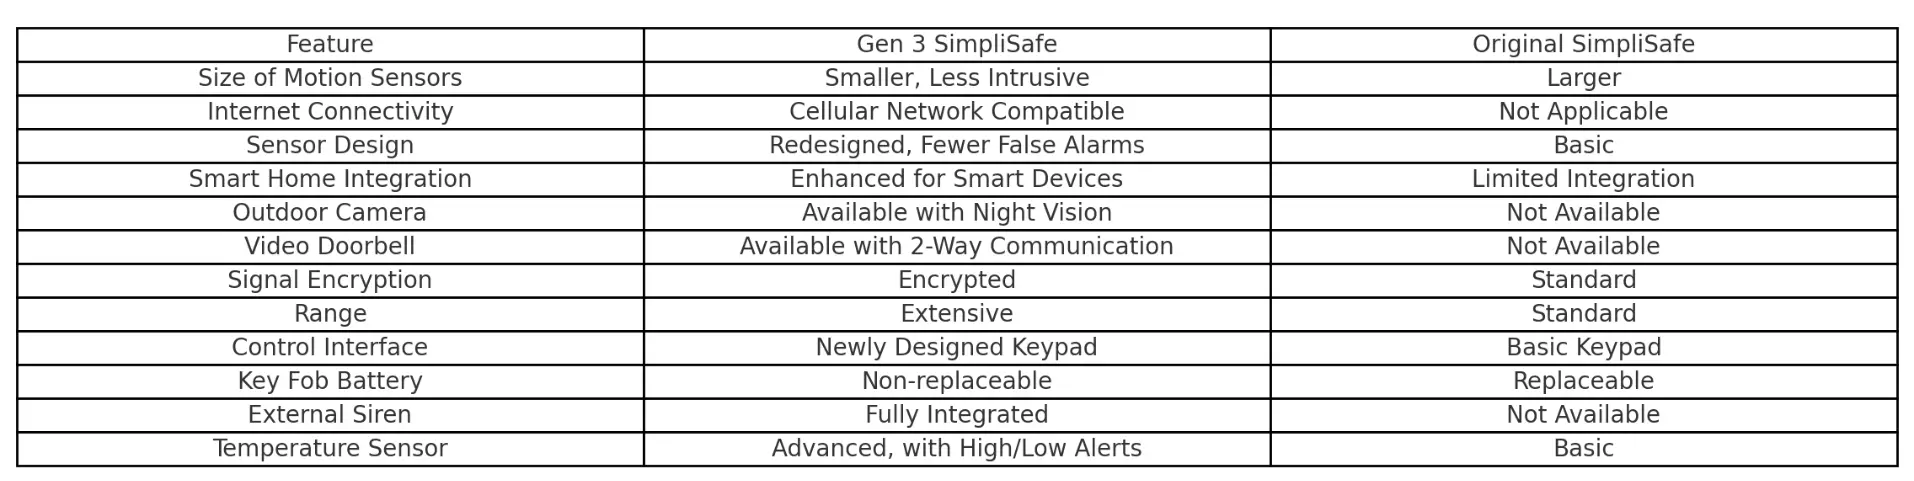  differences between the Gen 3 and Original SimpliSafe systems